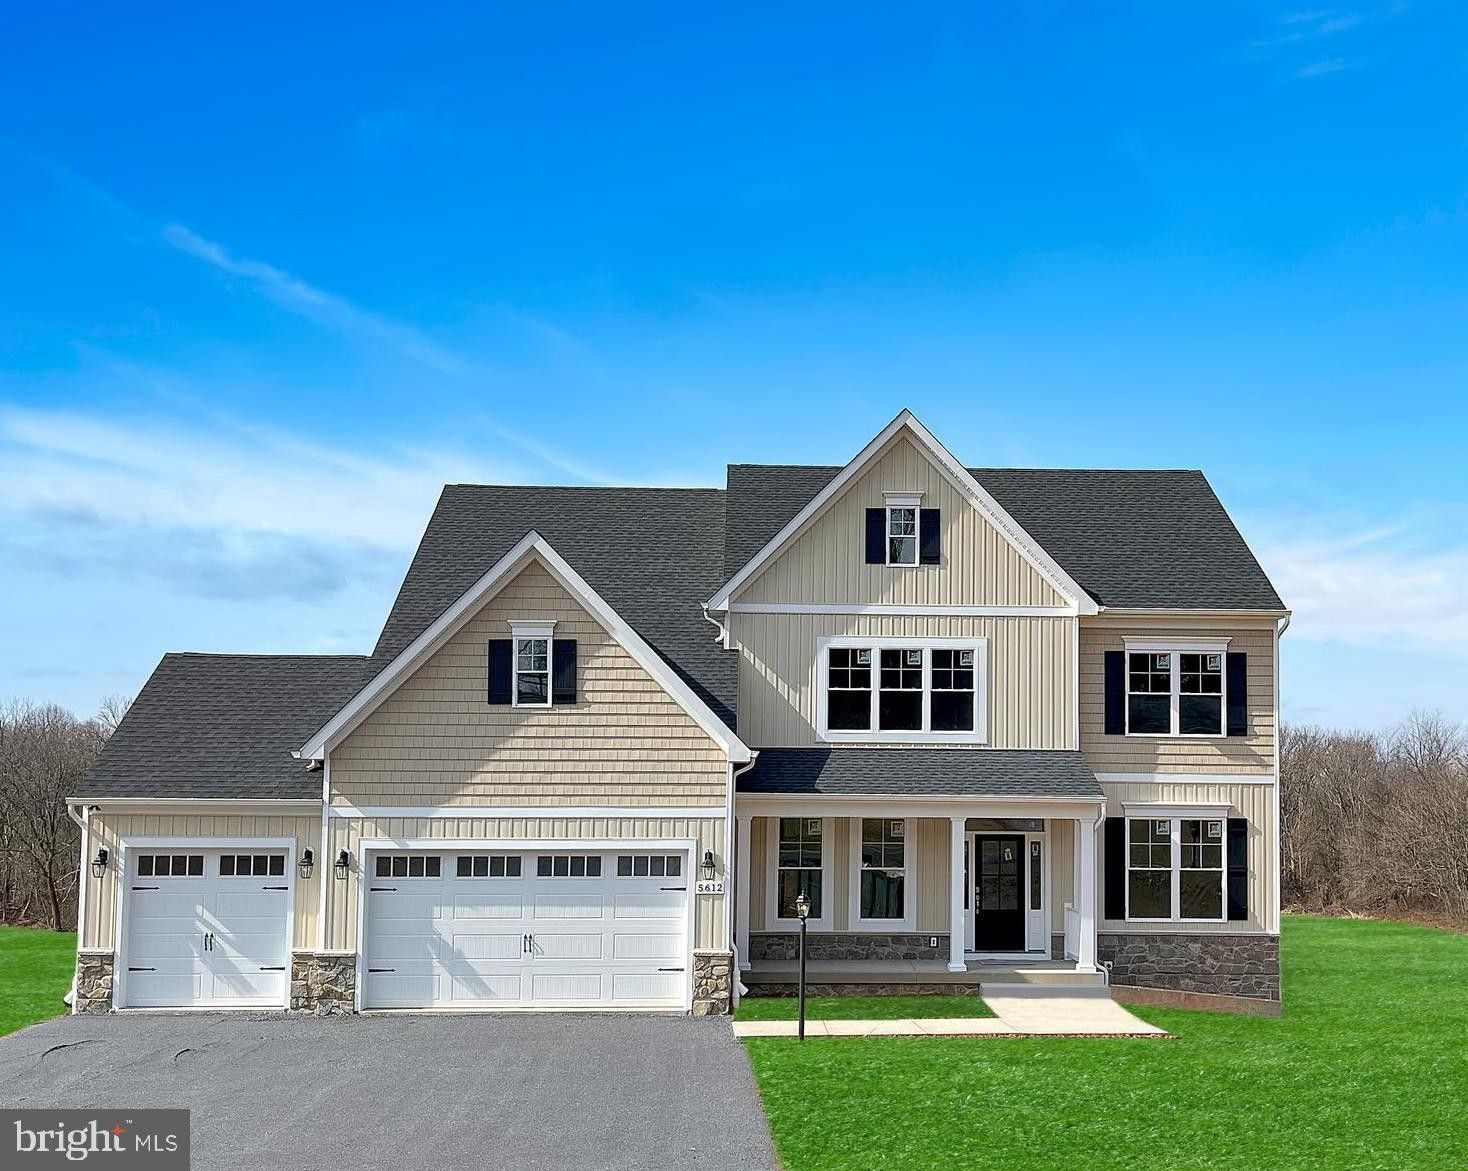 Lot 3. Westminster, MD 21157